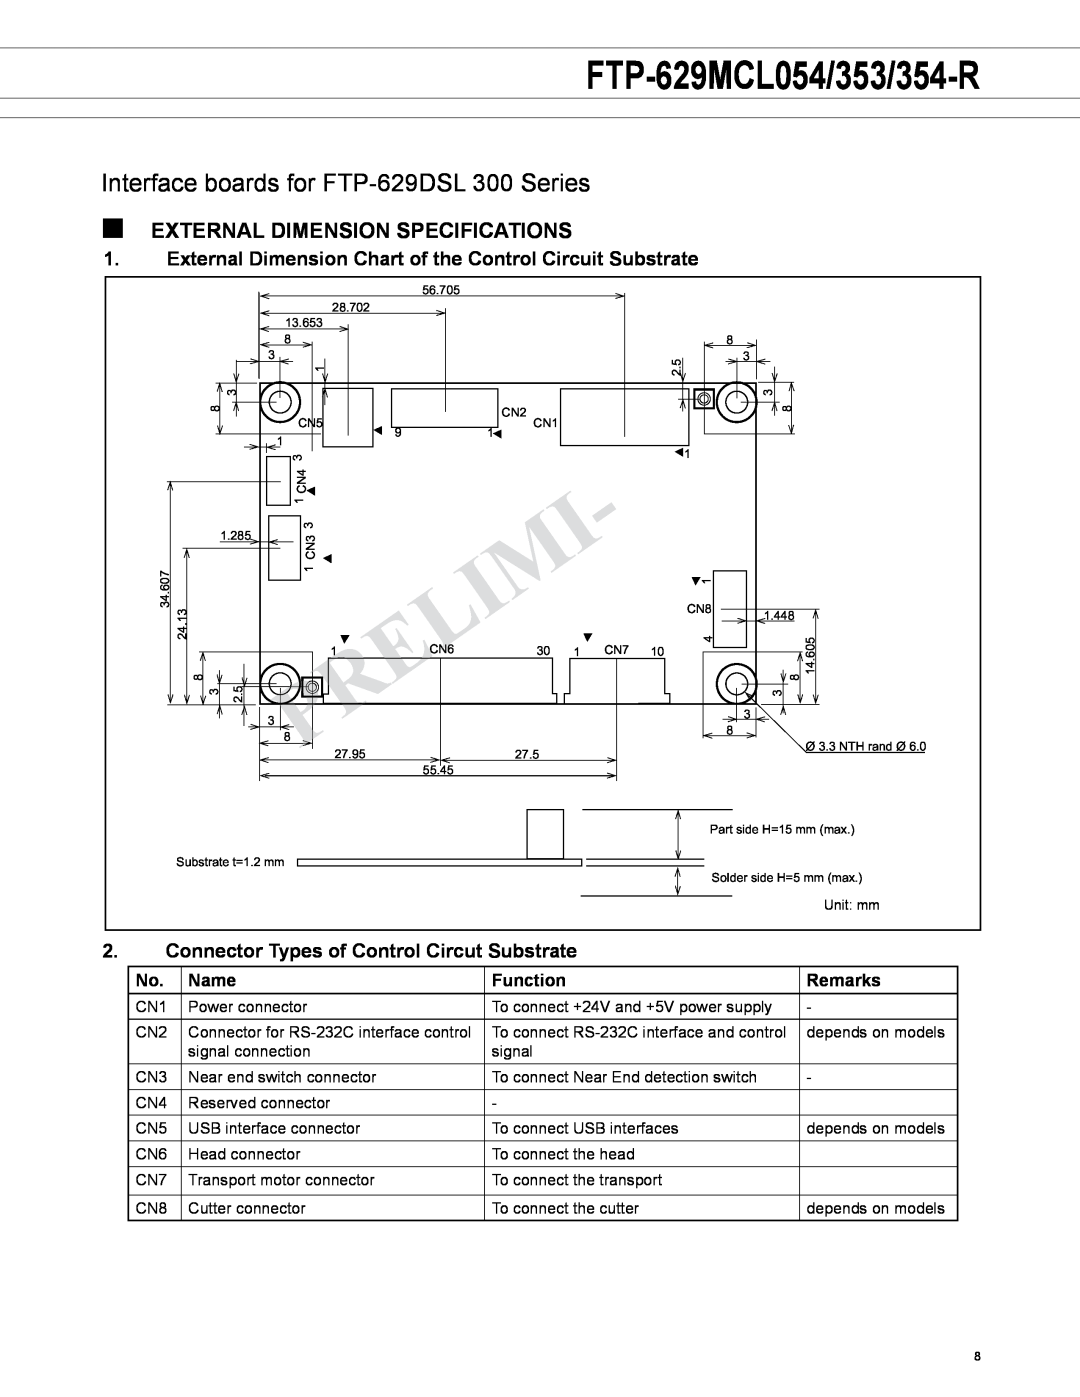 Fujitsu external dimension specifications, FTP-629MCL054/353/354-R, Interface boards for FTP-629DSL 300 Series, Name 